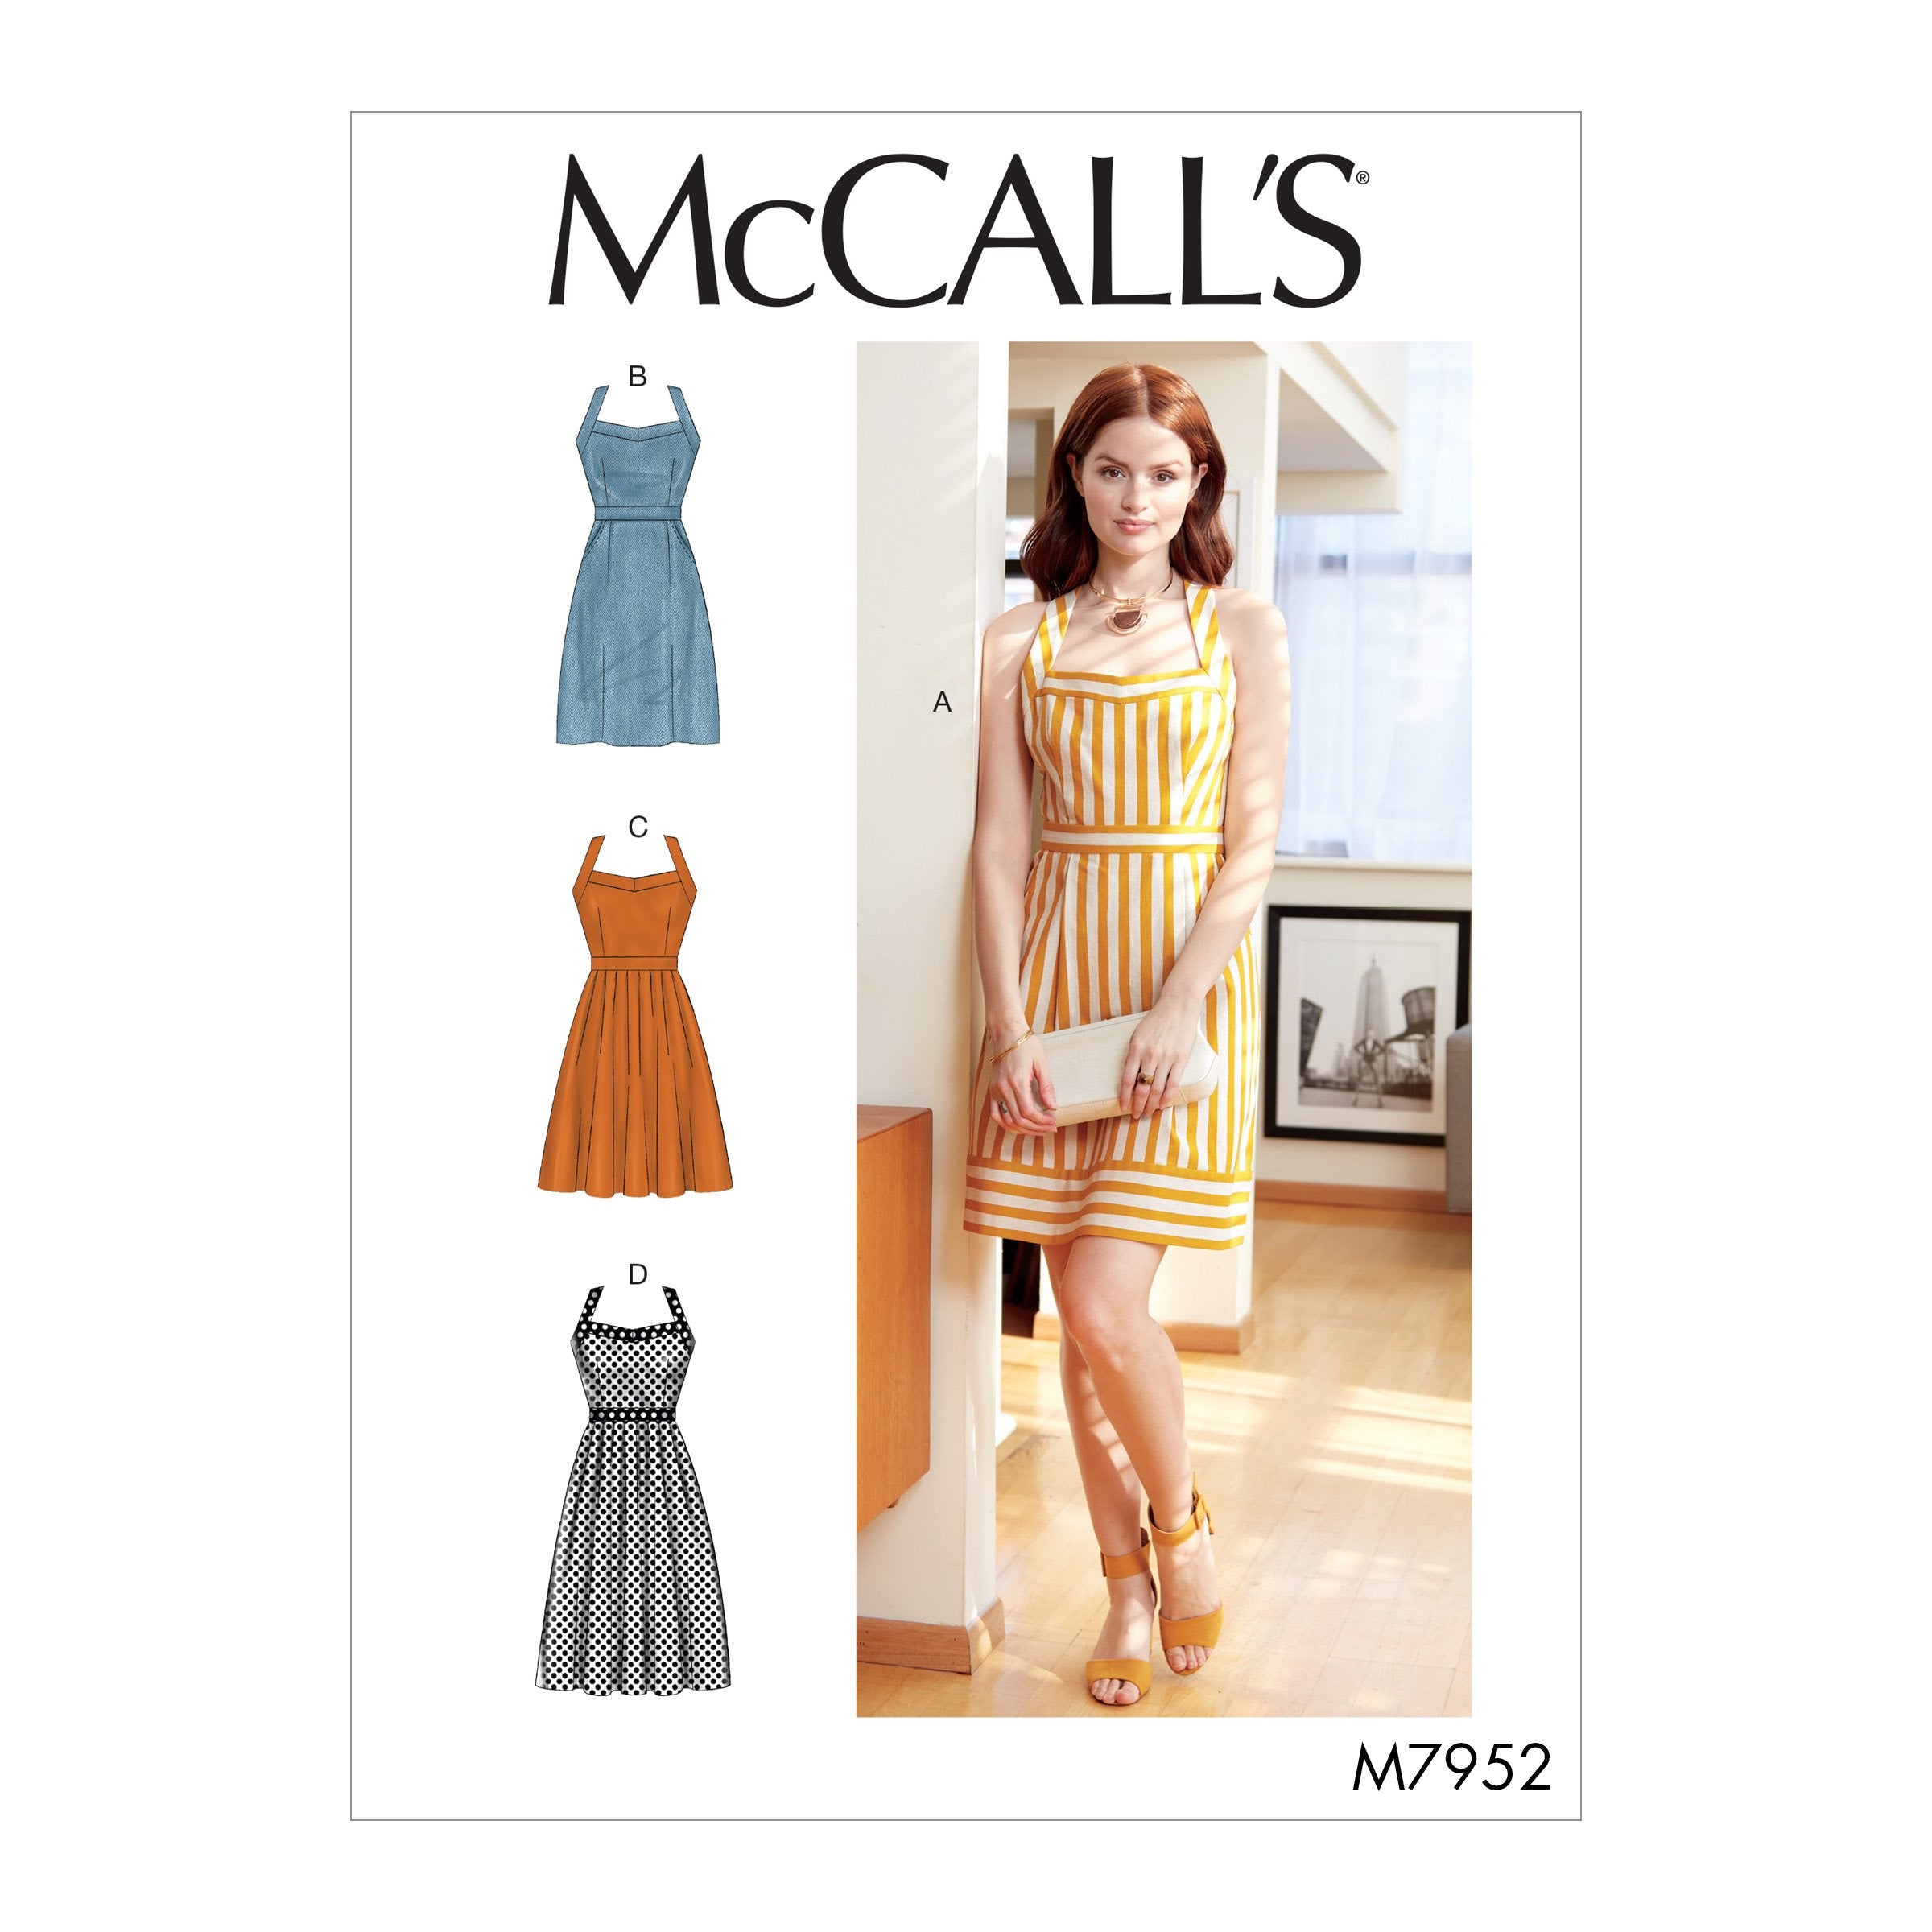 McCalls 7952 Dresses sewing pattern from Jaycotts Sewing Supplies